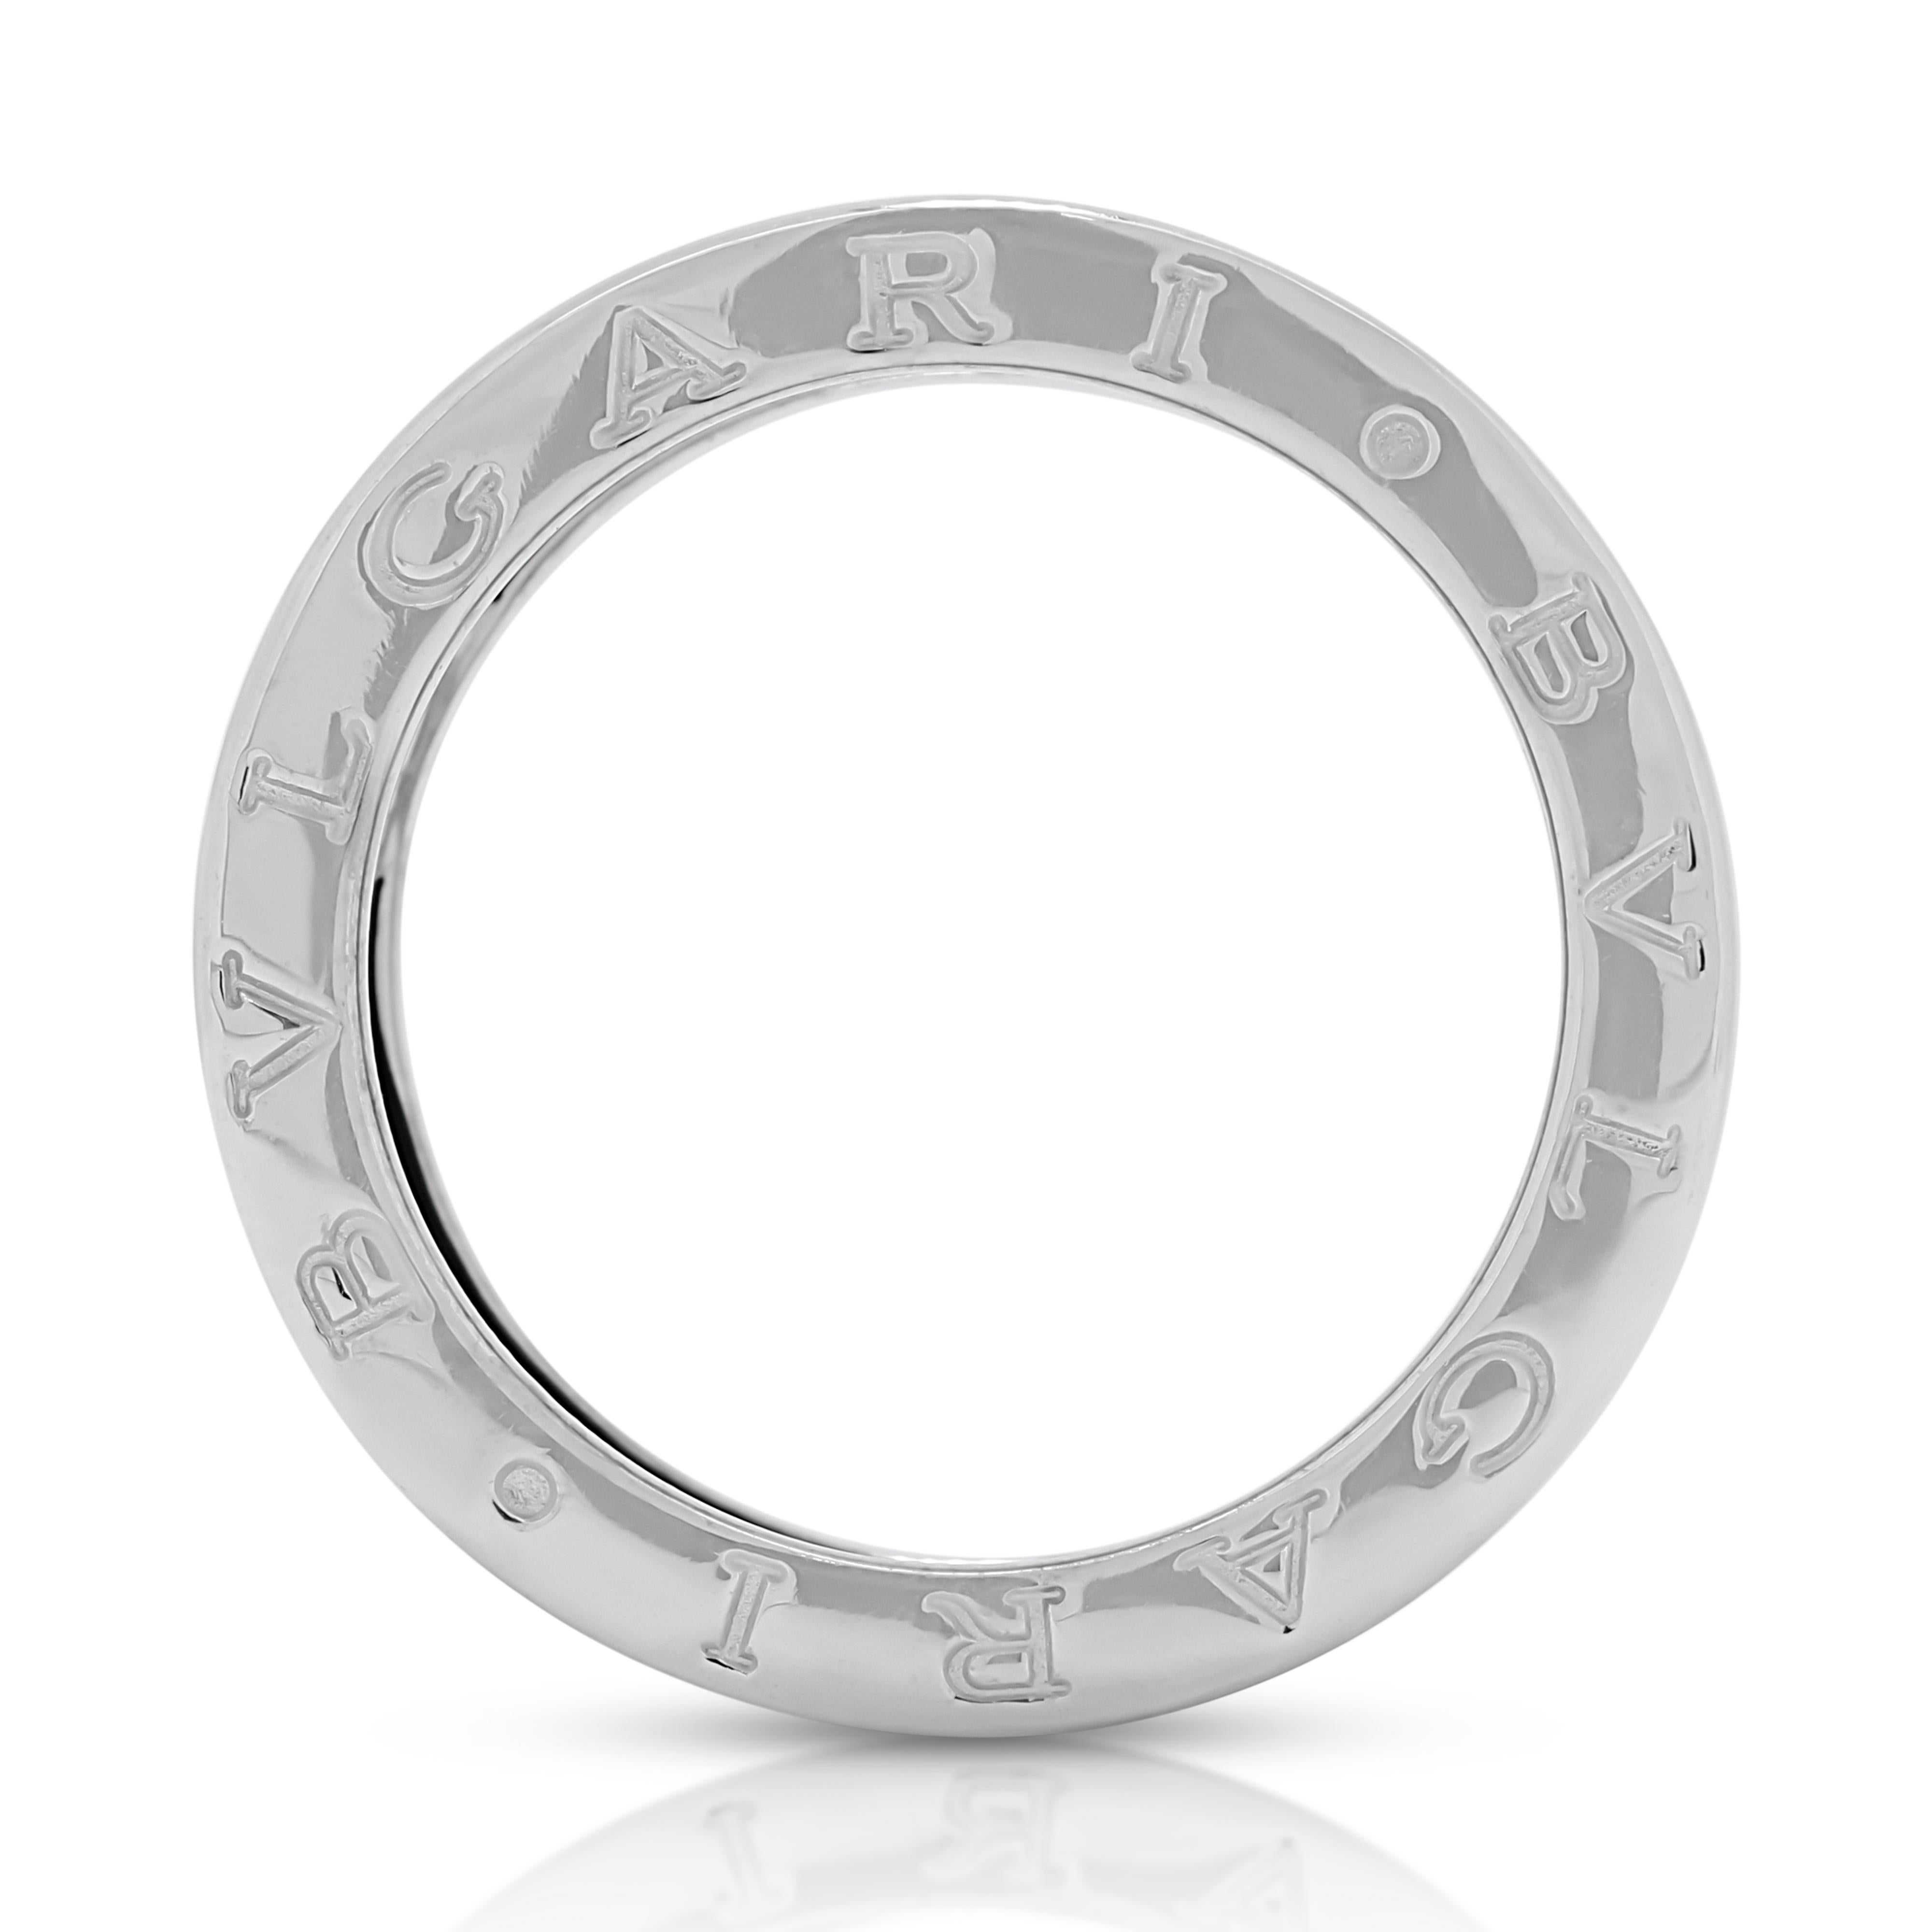 Sophisticated Bvlgari Band Ring in 18K White Gold For Sale 2